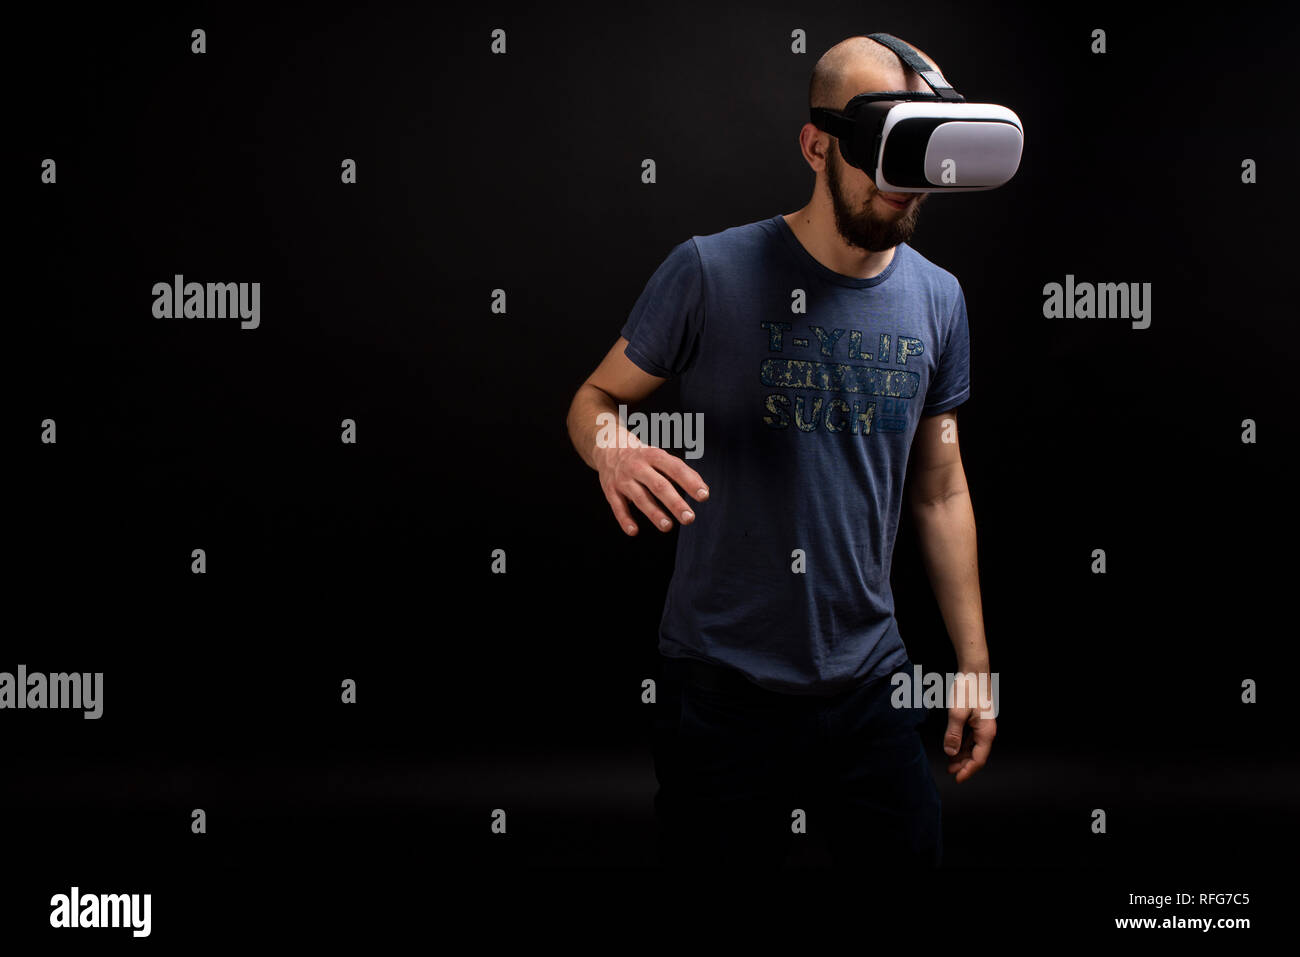 Male model using VR gear interacting while using device. Virtual game simulation. Copy space available Stock Photo